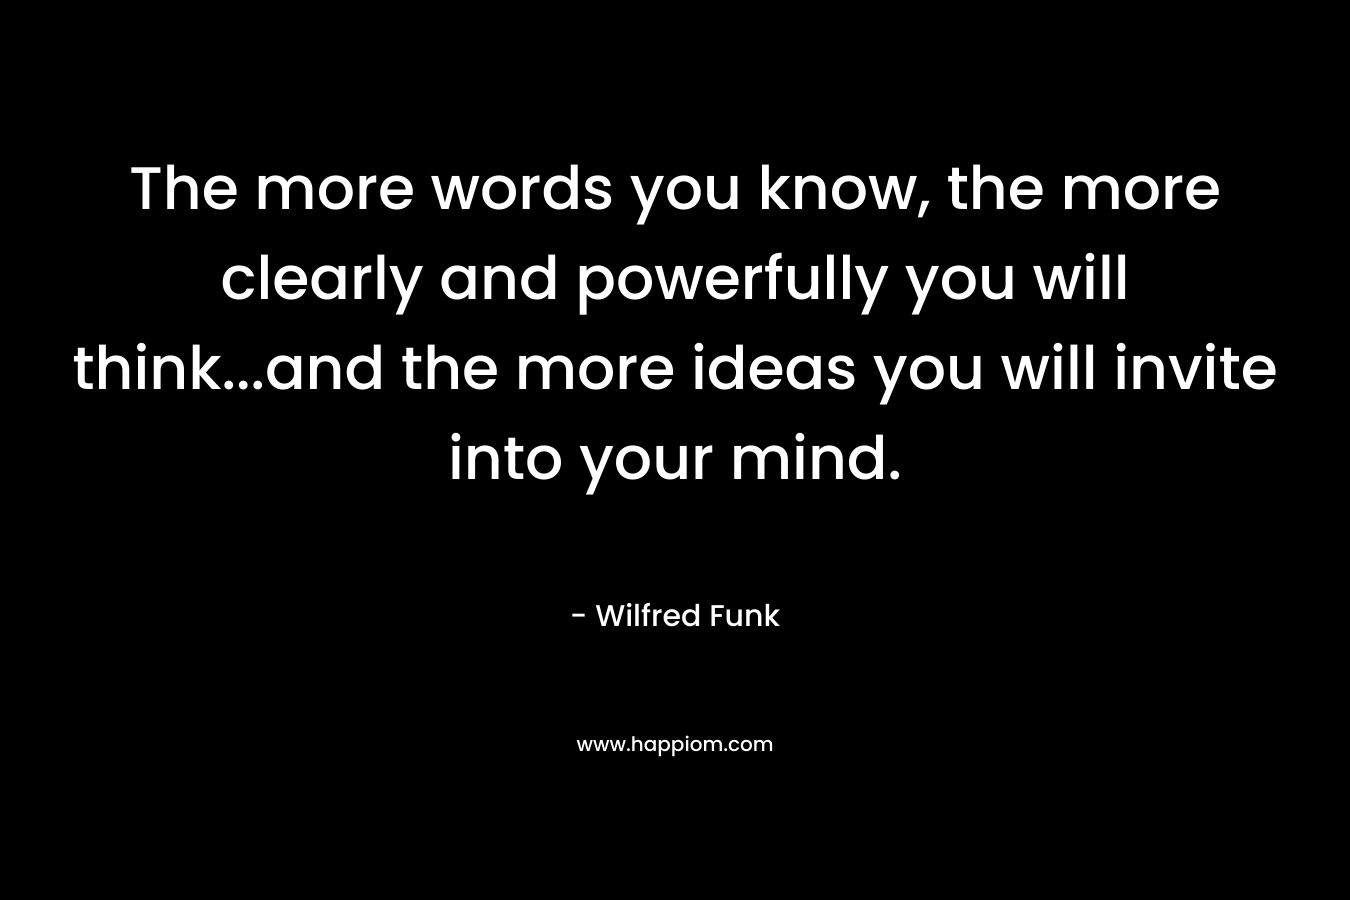 The more words you know, the more clearly and powerfully you will think…and the more ideas you will invite into your mind. – Wilfred Funk